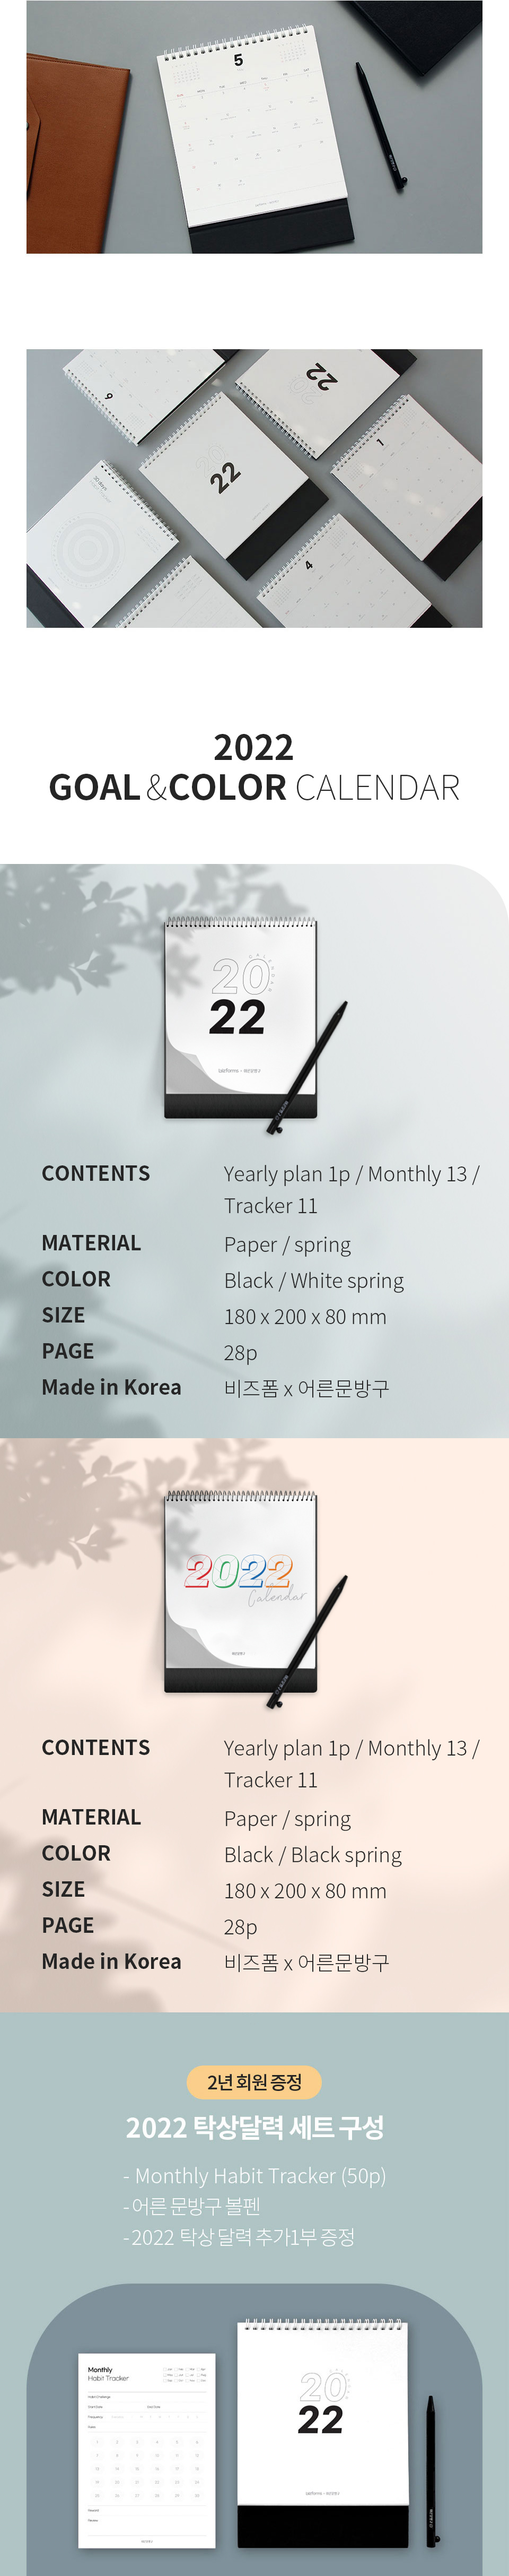 2022 GOAL CALENDAR ①CONTENTS : Yearly plan 1p/ Monthly 13/ Tracker 11 ②MATERIAL : Paper/ spring ③COLOR : Black/ White spring ④SIZE : 180X200X80mm ⑤PAGE : 28P ⑥ Made in Korea : 비즈폼x어른문방구 + 2년 회원 증정! 2022 탁상달력 세트 구성 -Monthly Habit Tracker(50p) -어른문방구 볼펜 -2022 탁상달력 추가 1부 증정